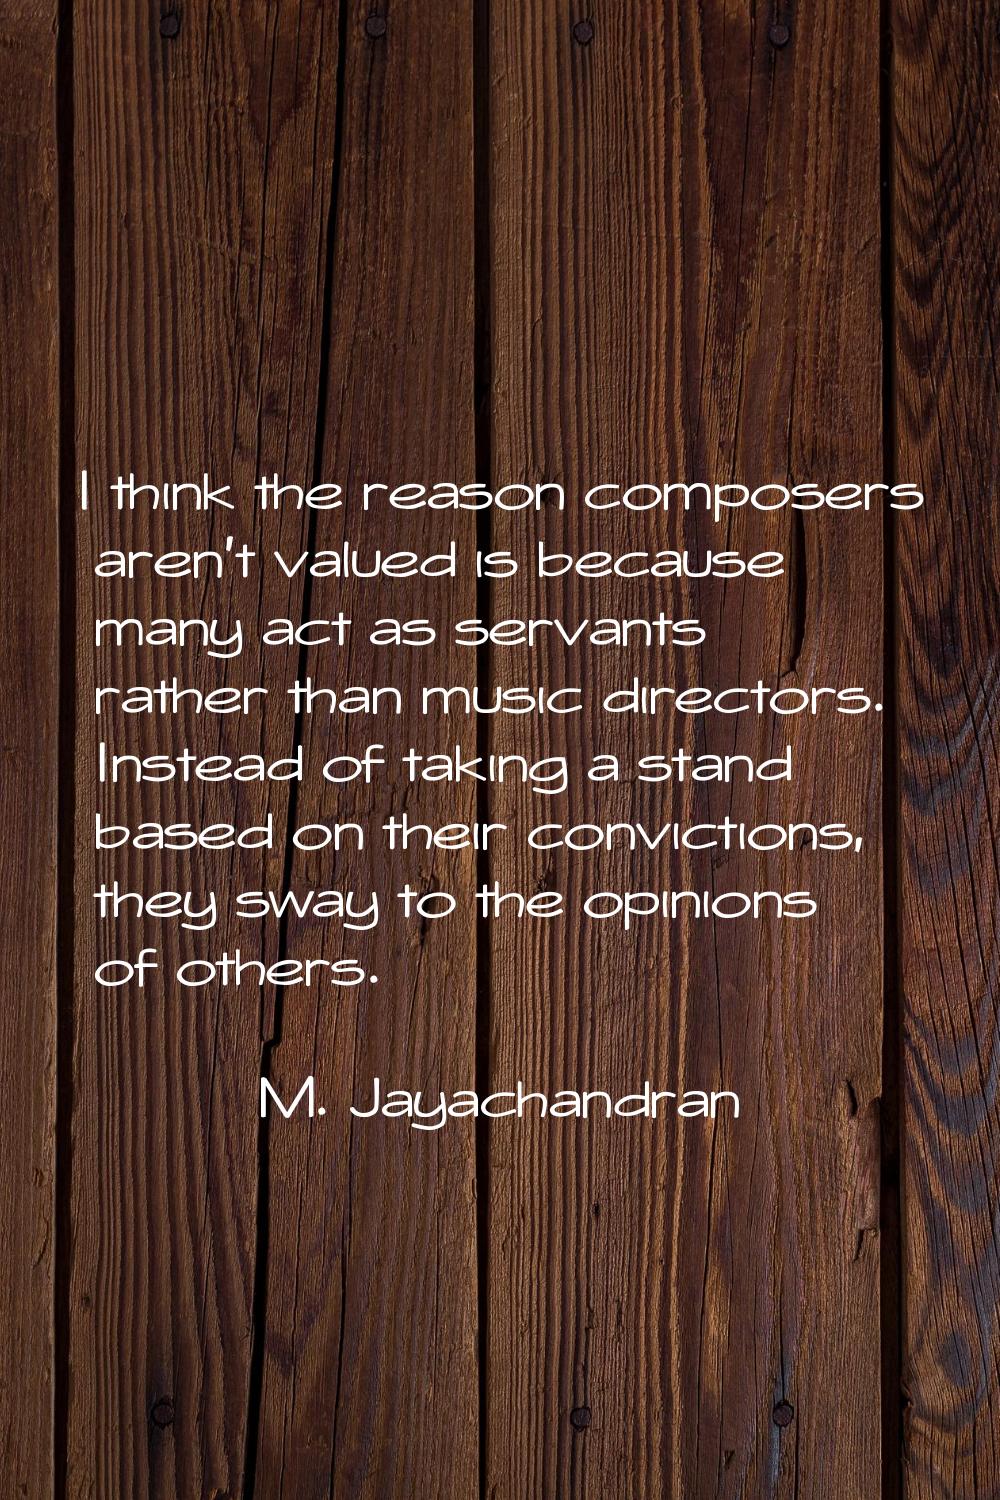 I think the reason composers aren't valued is because many act as servants rather than music direct